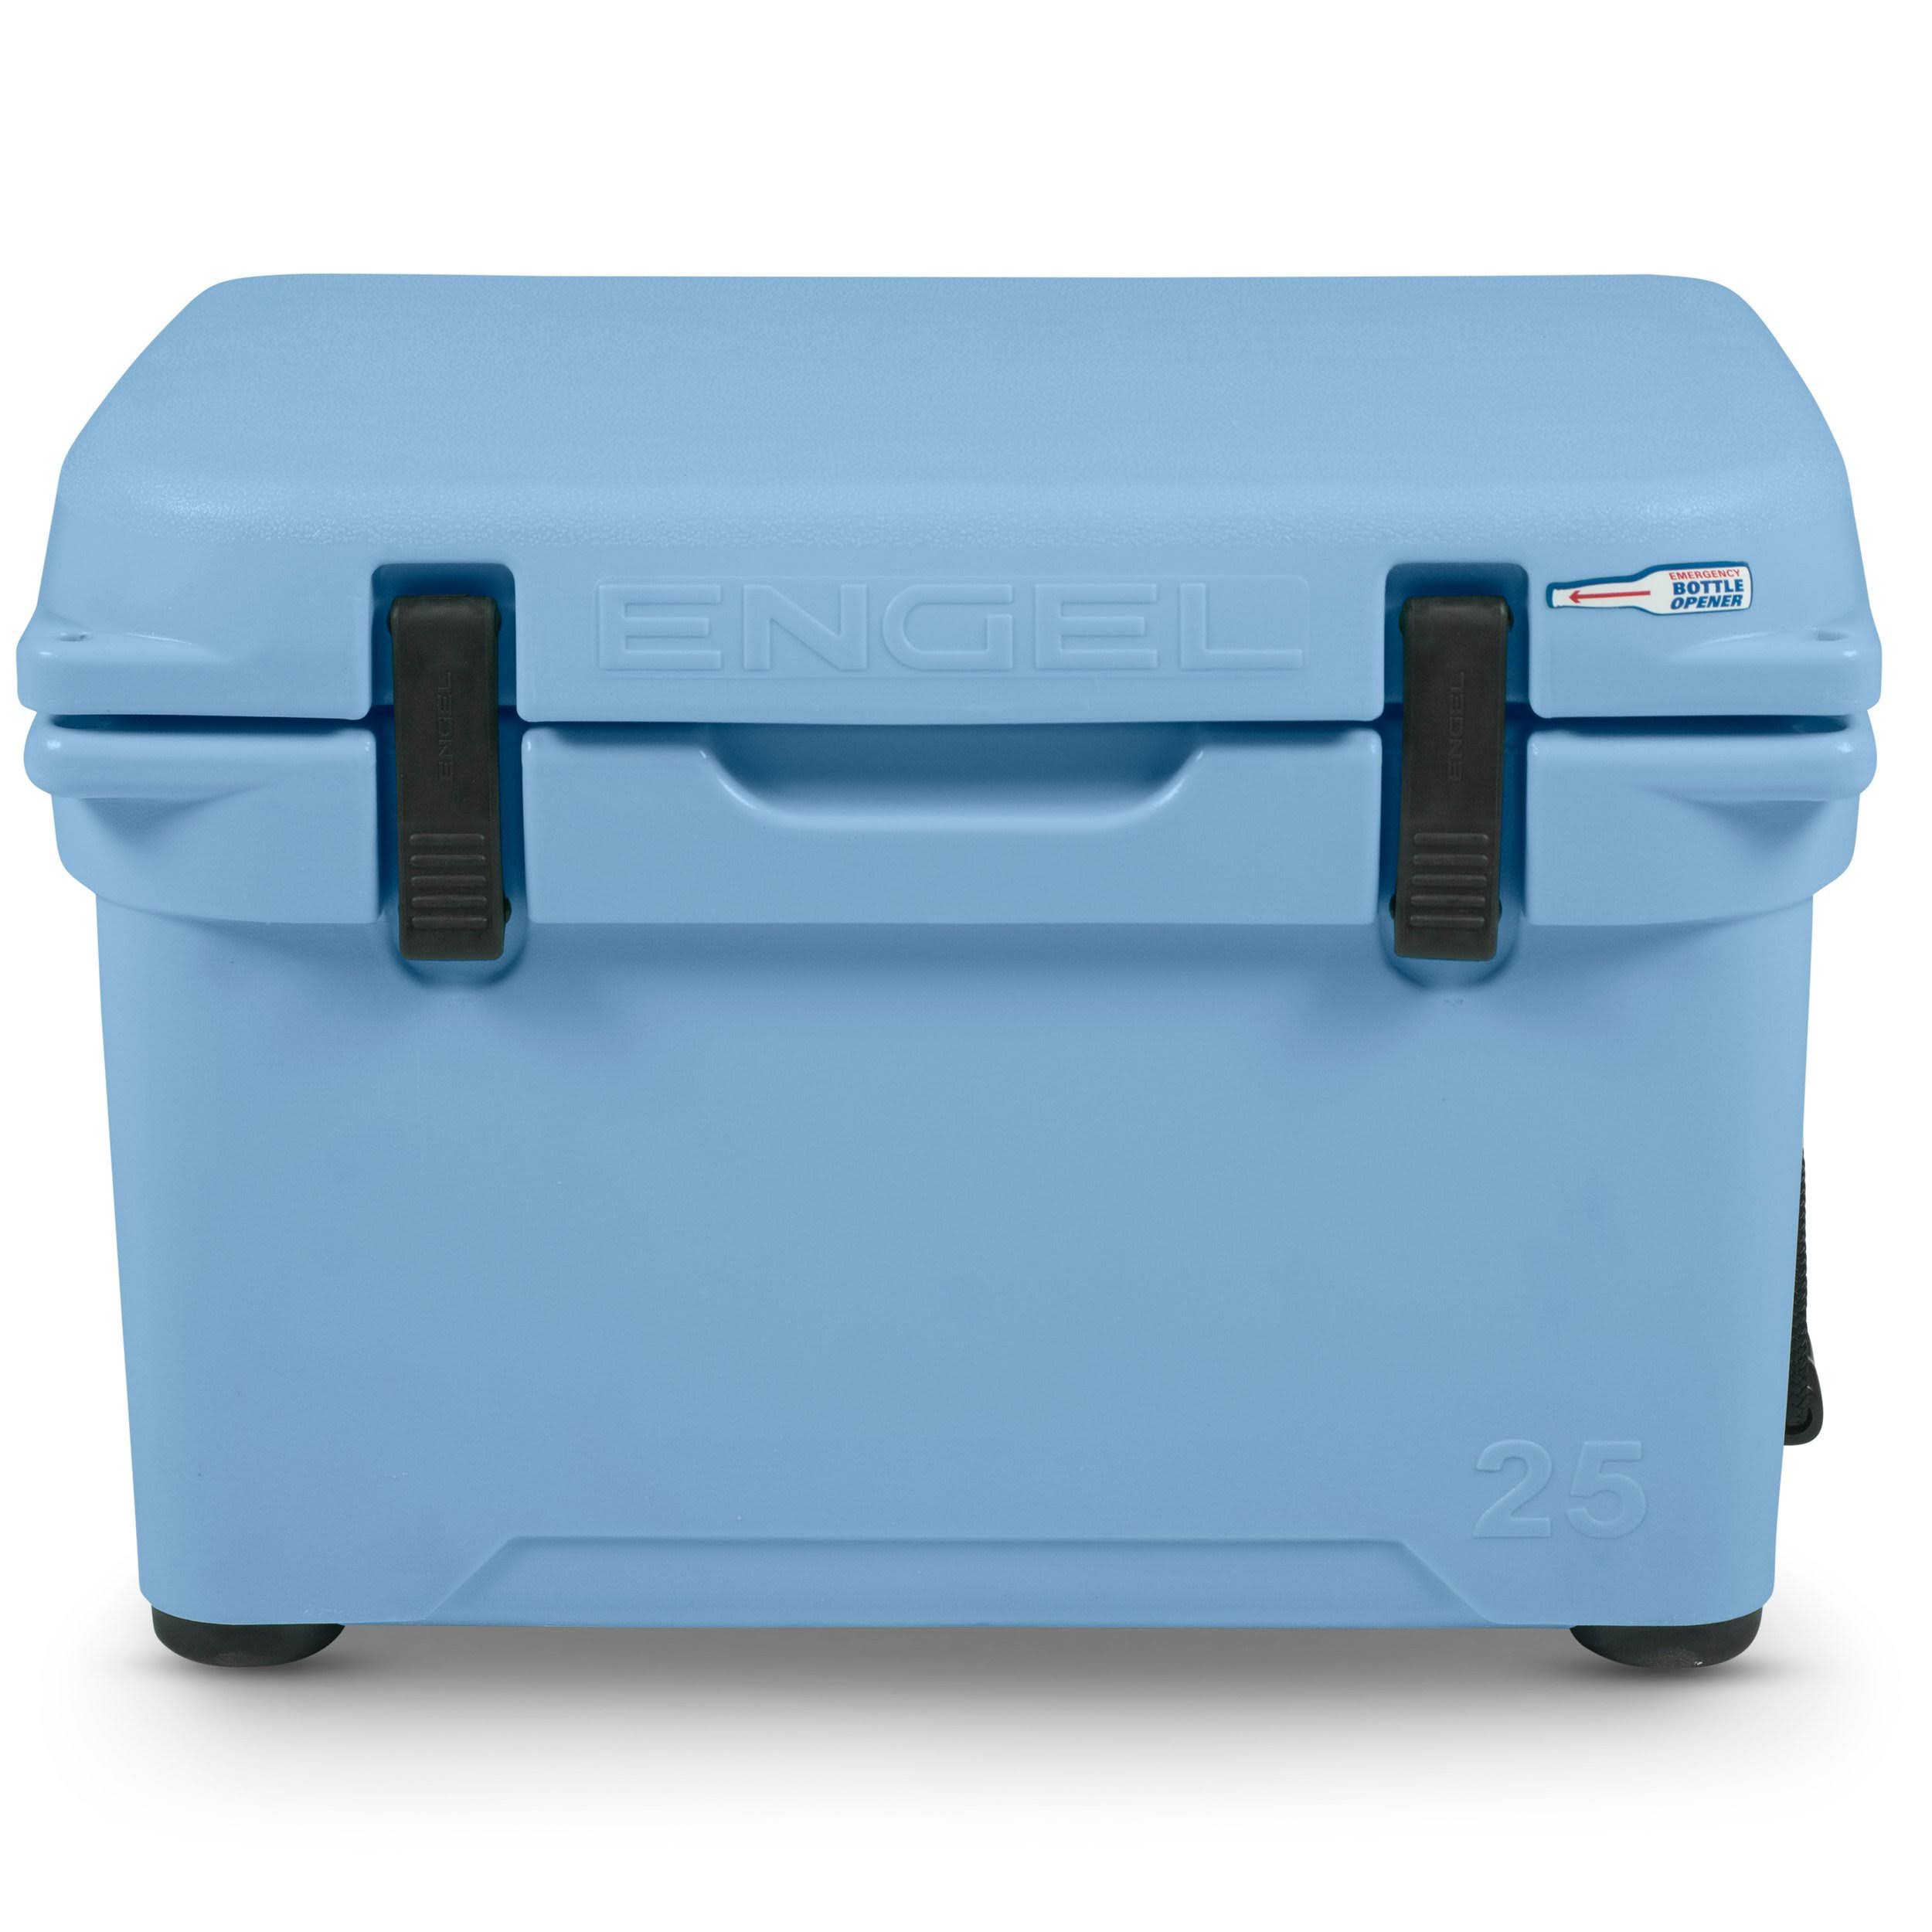 Engel Coolers 25 High-Performance Roto-Molded Cooler Arctic Blue - ReRG